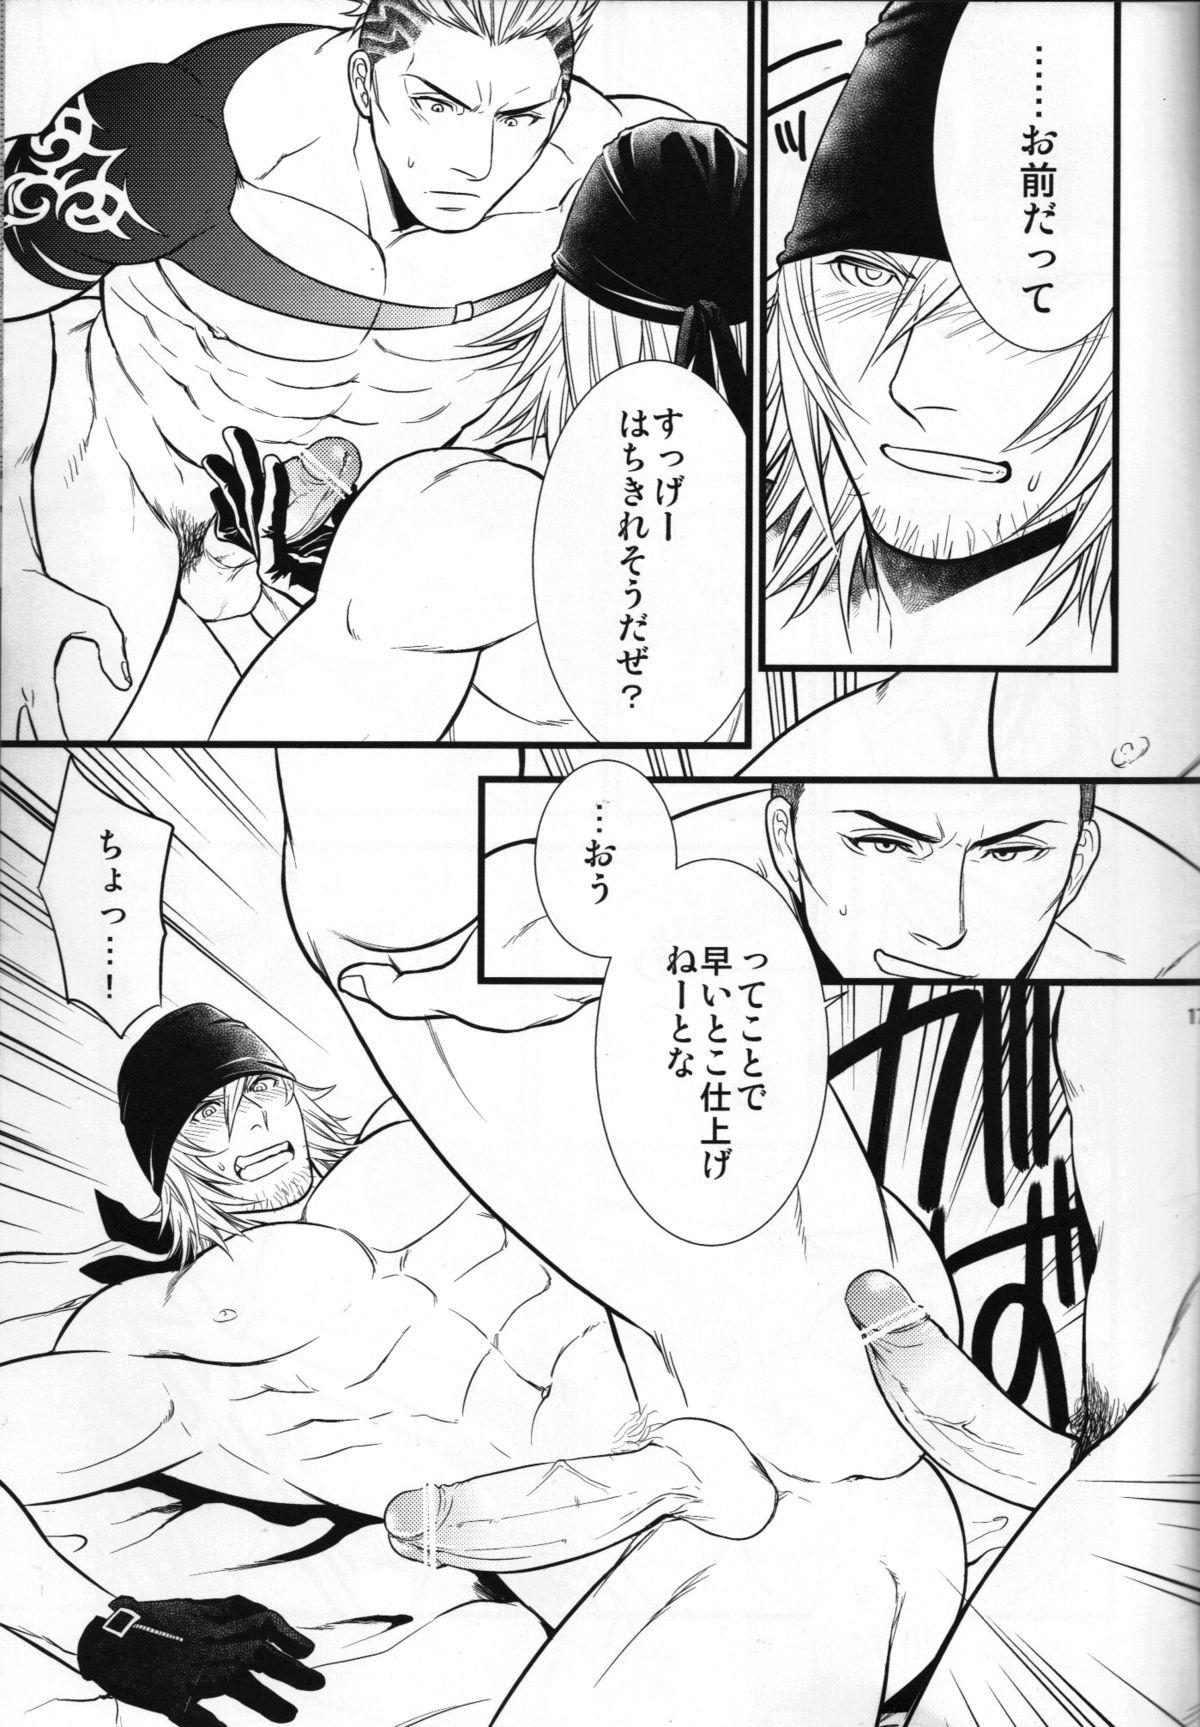 Oldyoung Saves Me 2 - Final fantasy xiii Gay Interracial - Page 12